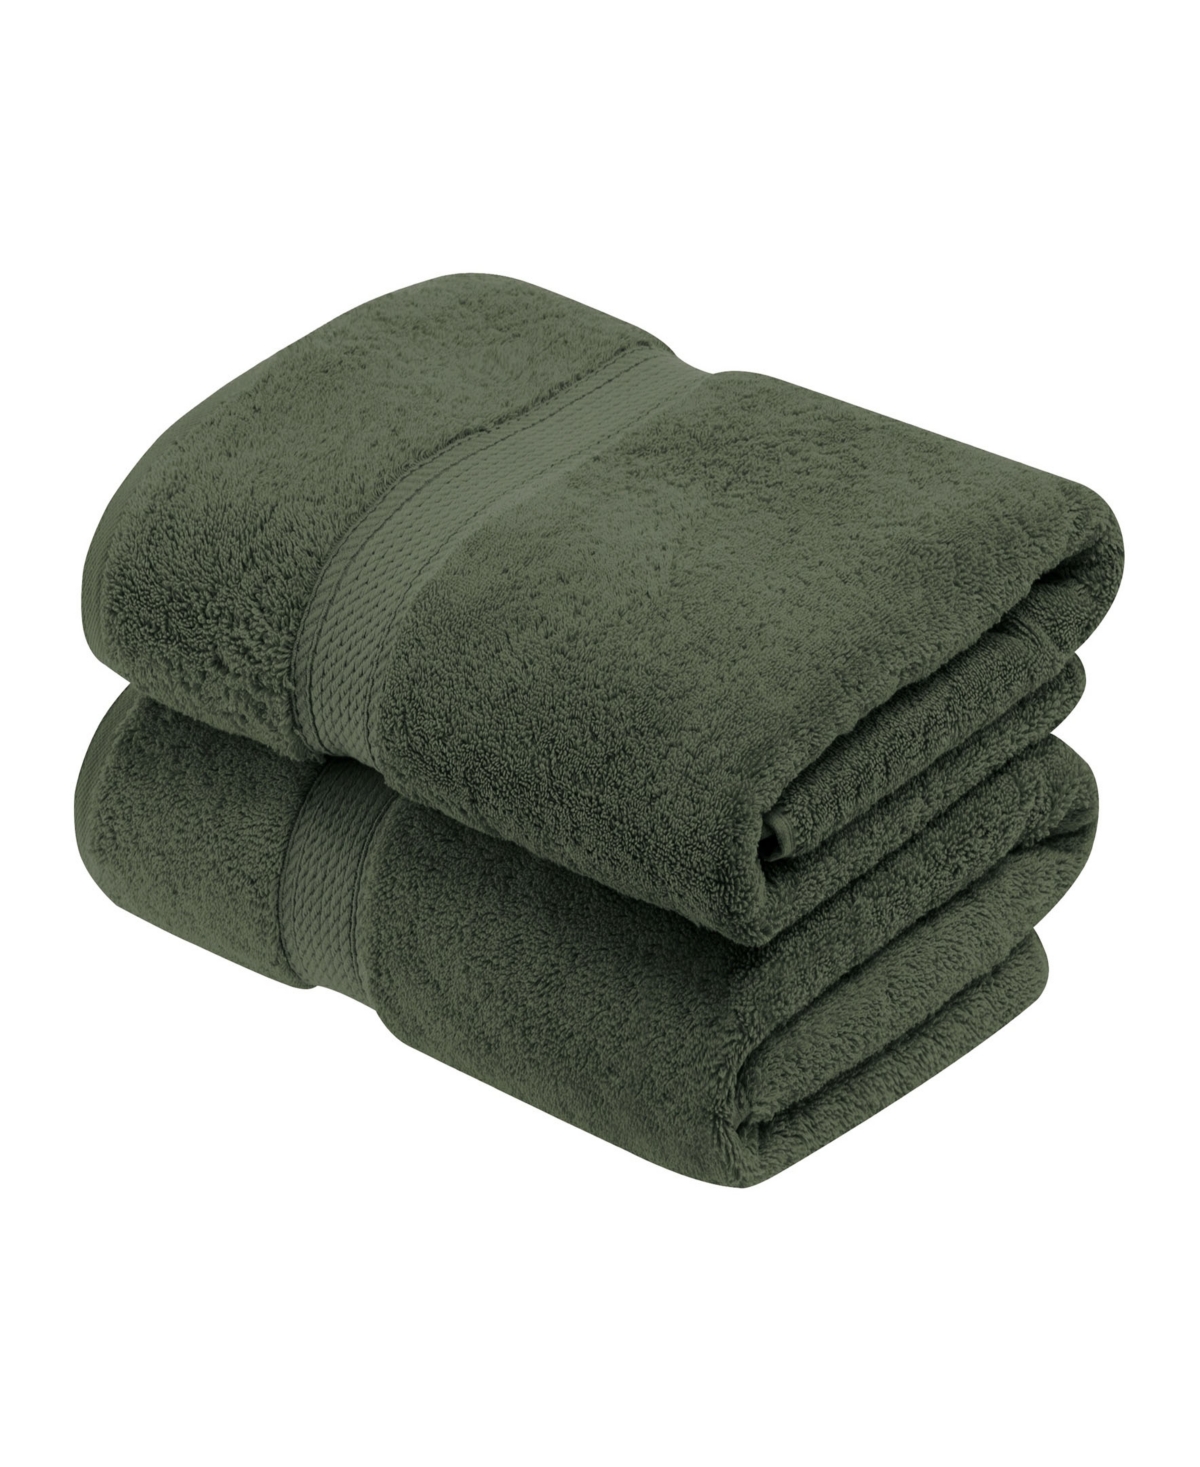 Superior Highly Absorbent Egyptian Cotton 2-piece Ultra Plush Solid Bath Towel Set Bedding In Green